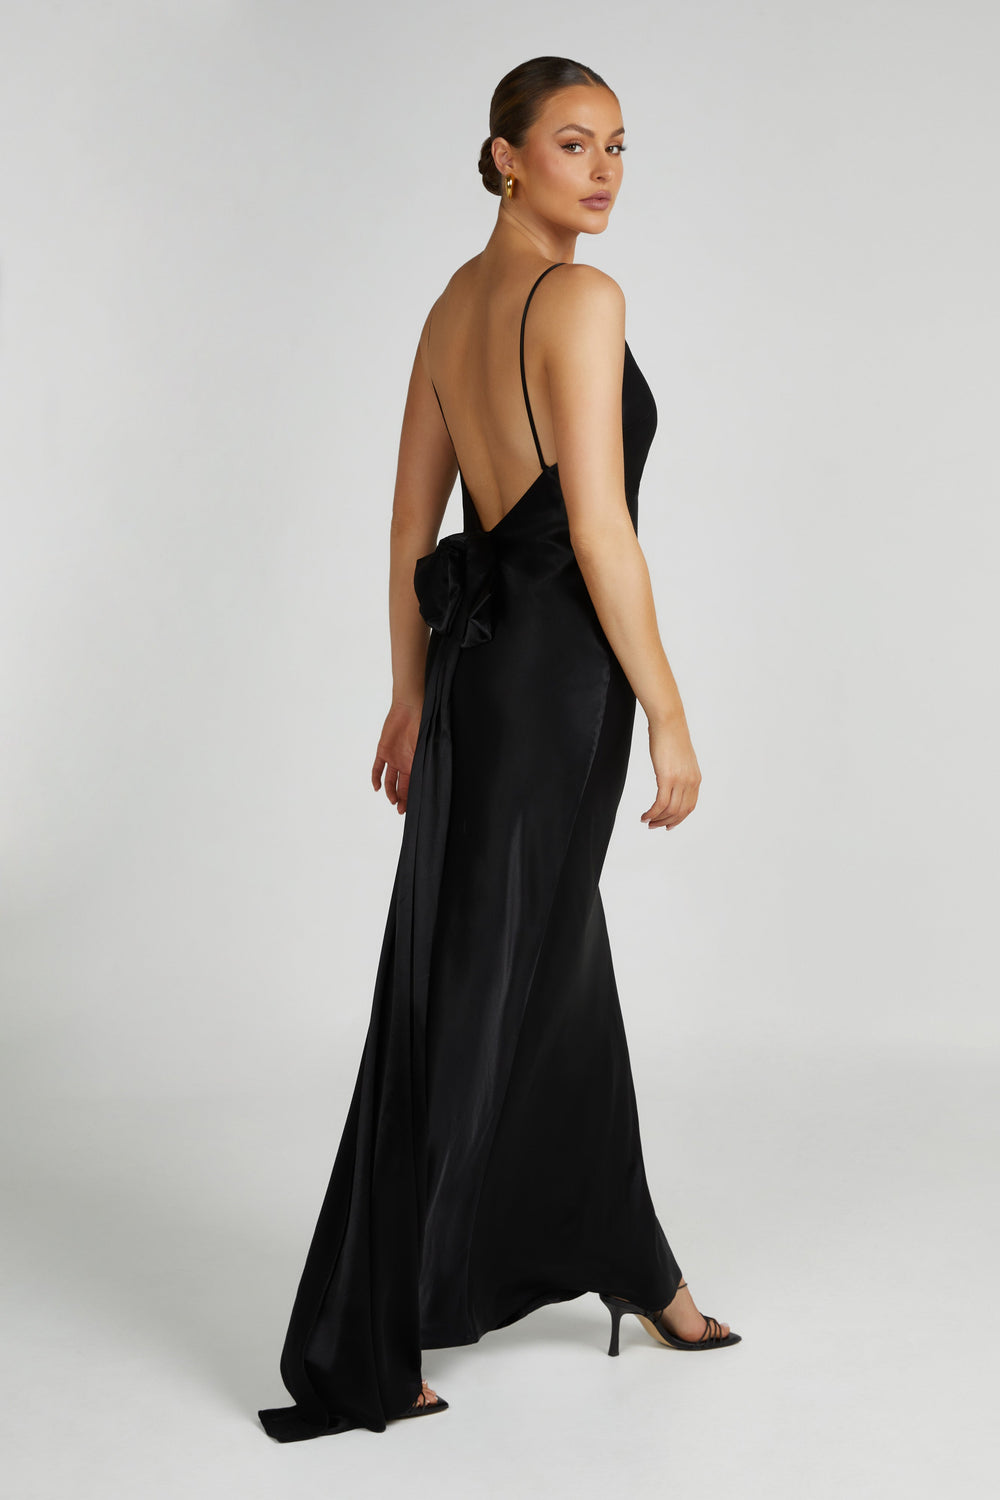 Kailey Low Back Maxi Dress With Detachable Bow Train - Black